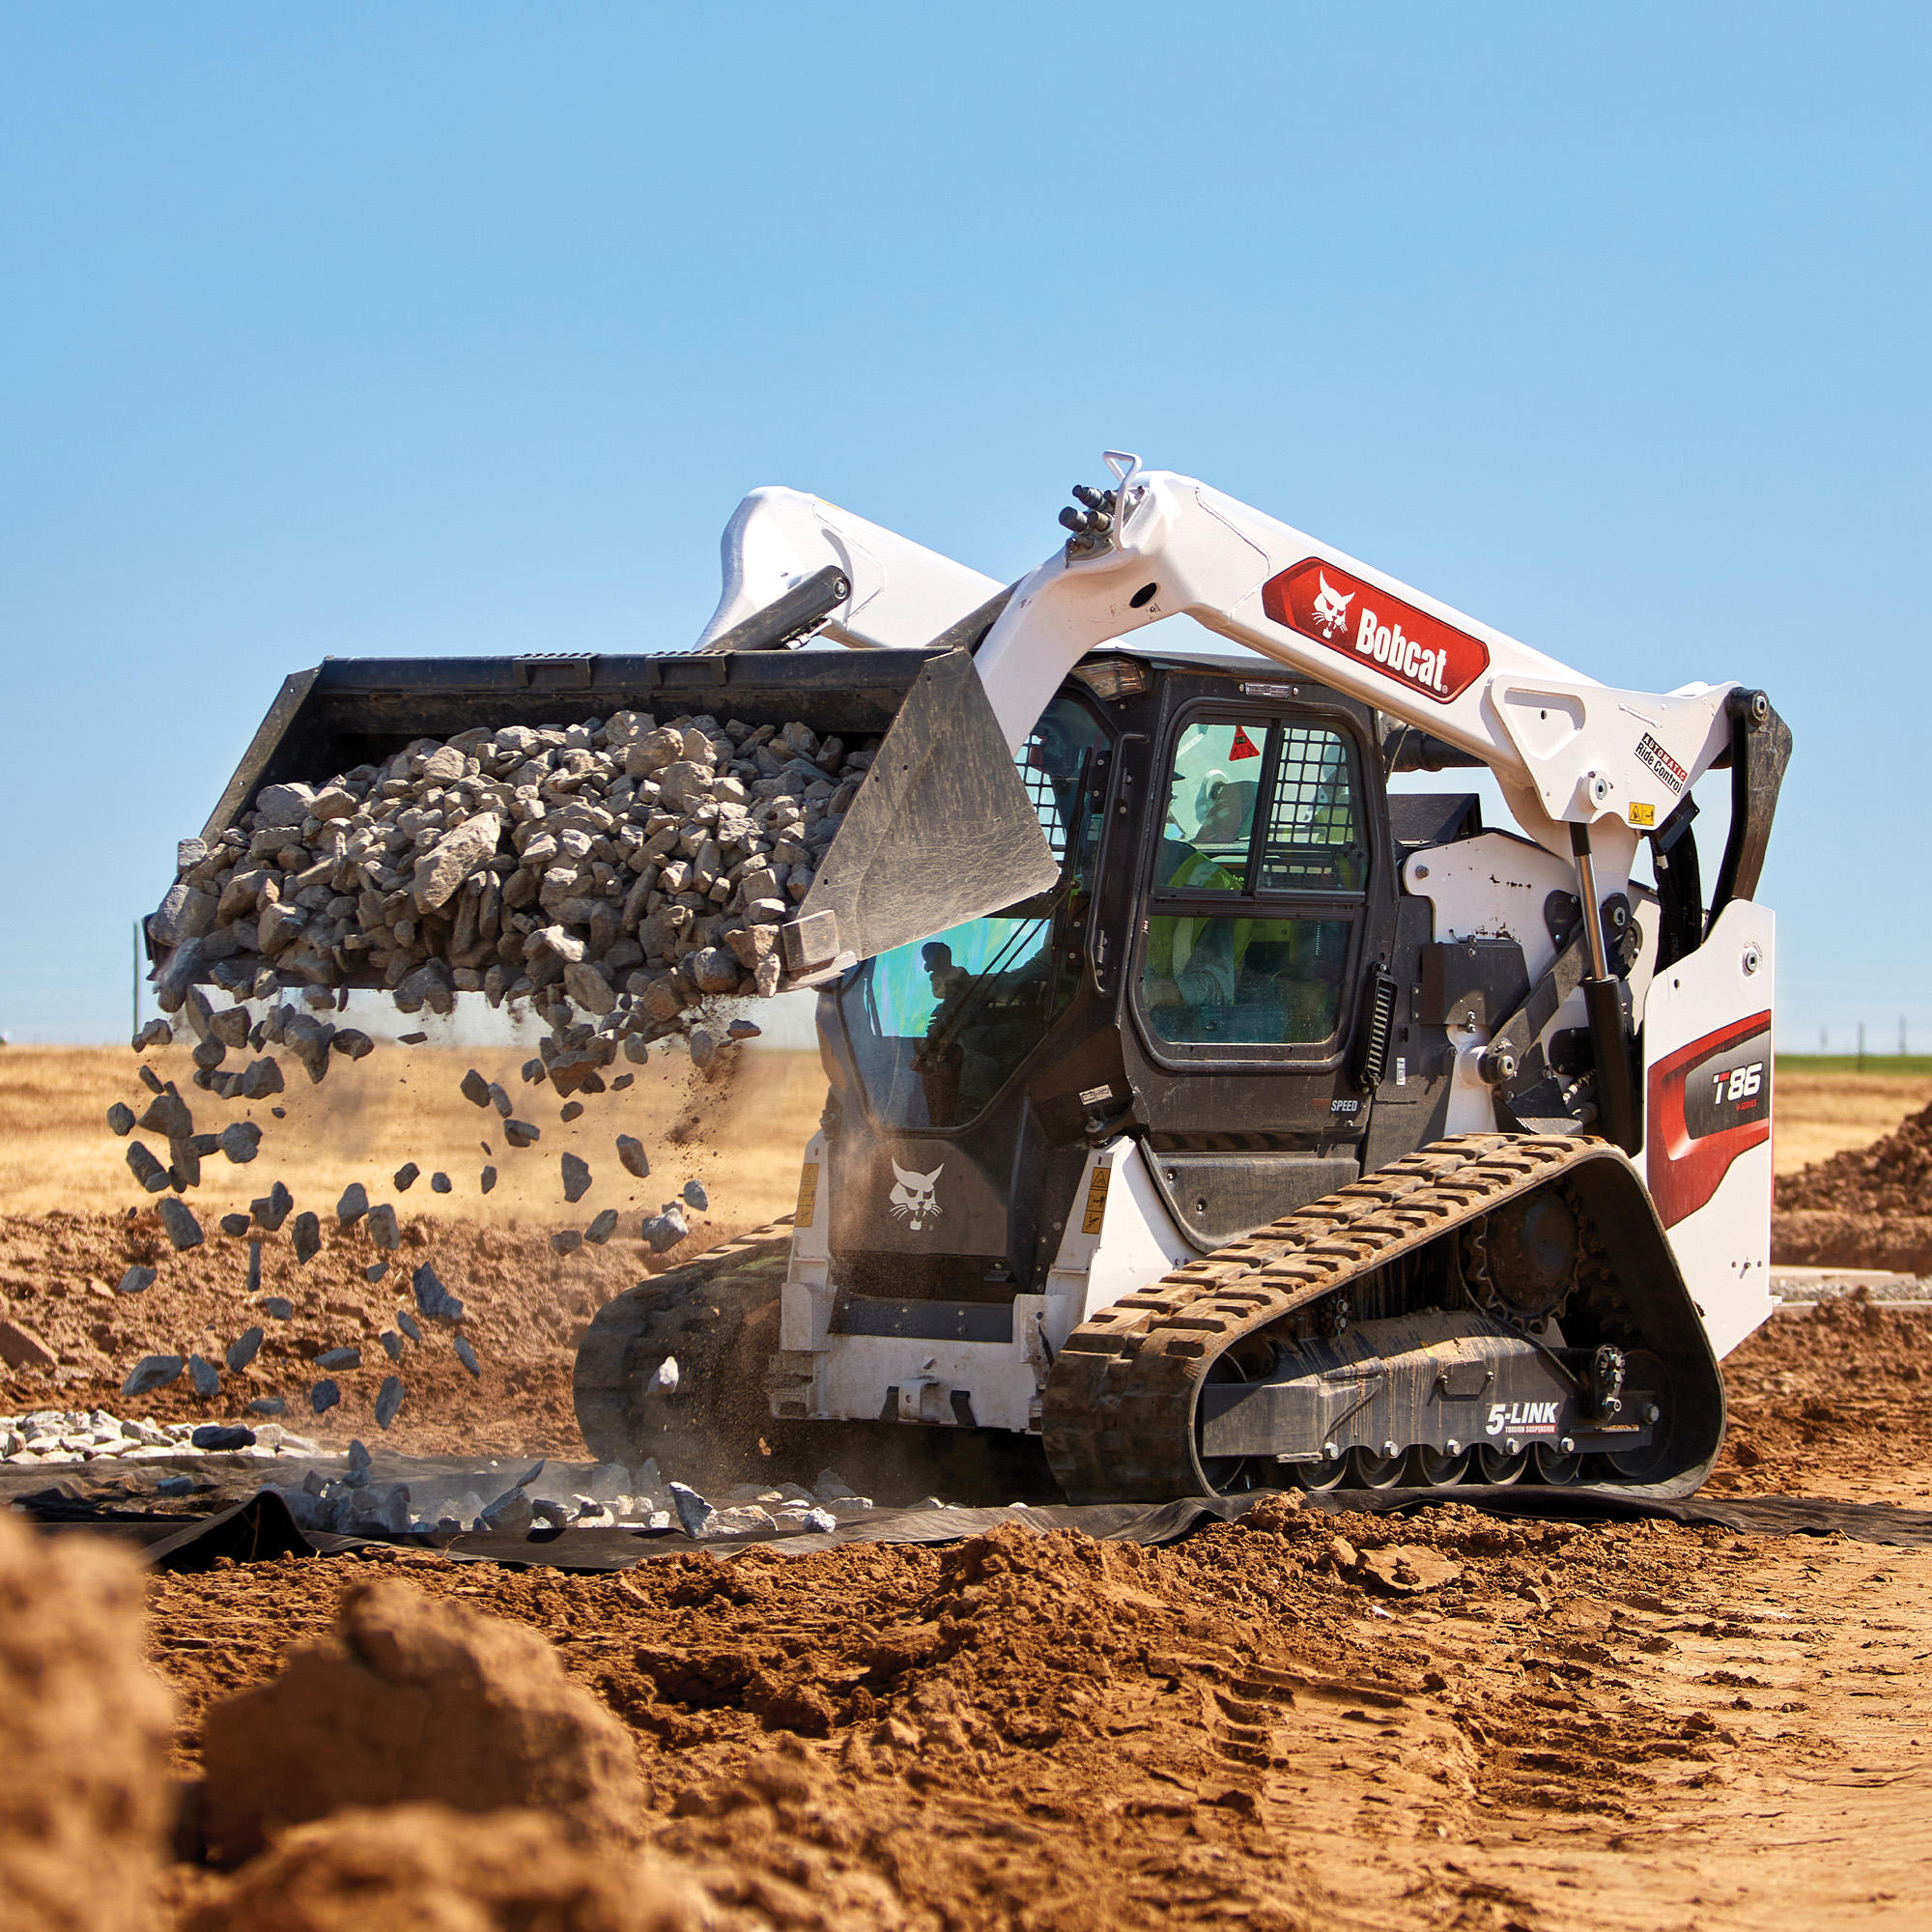 Bobcat T86 dumping and spreading rock with bucket